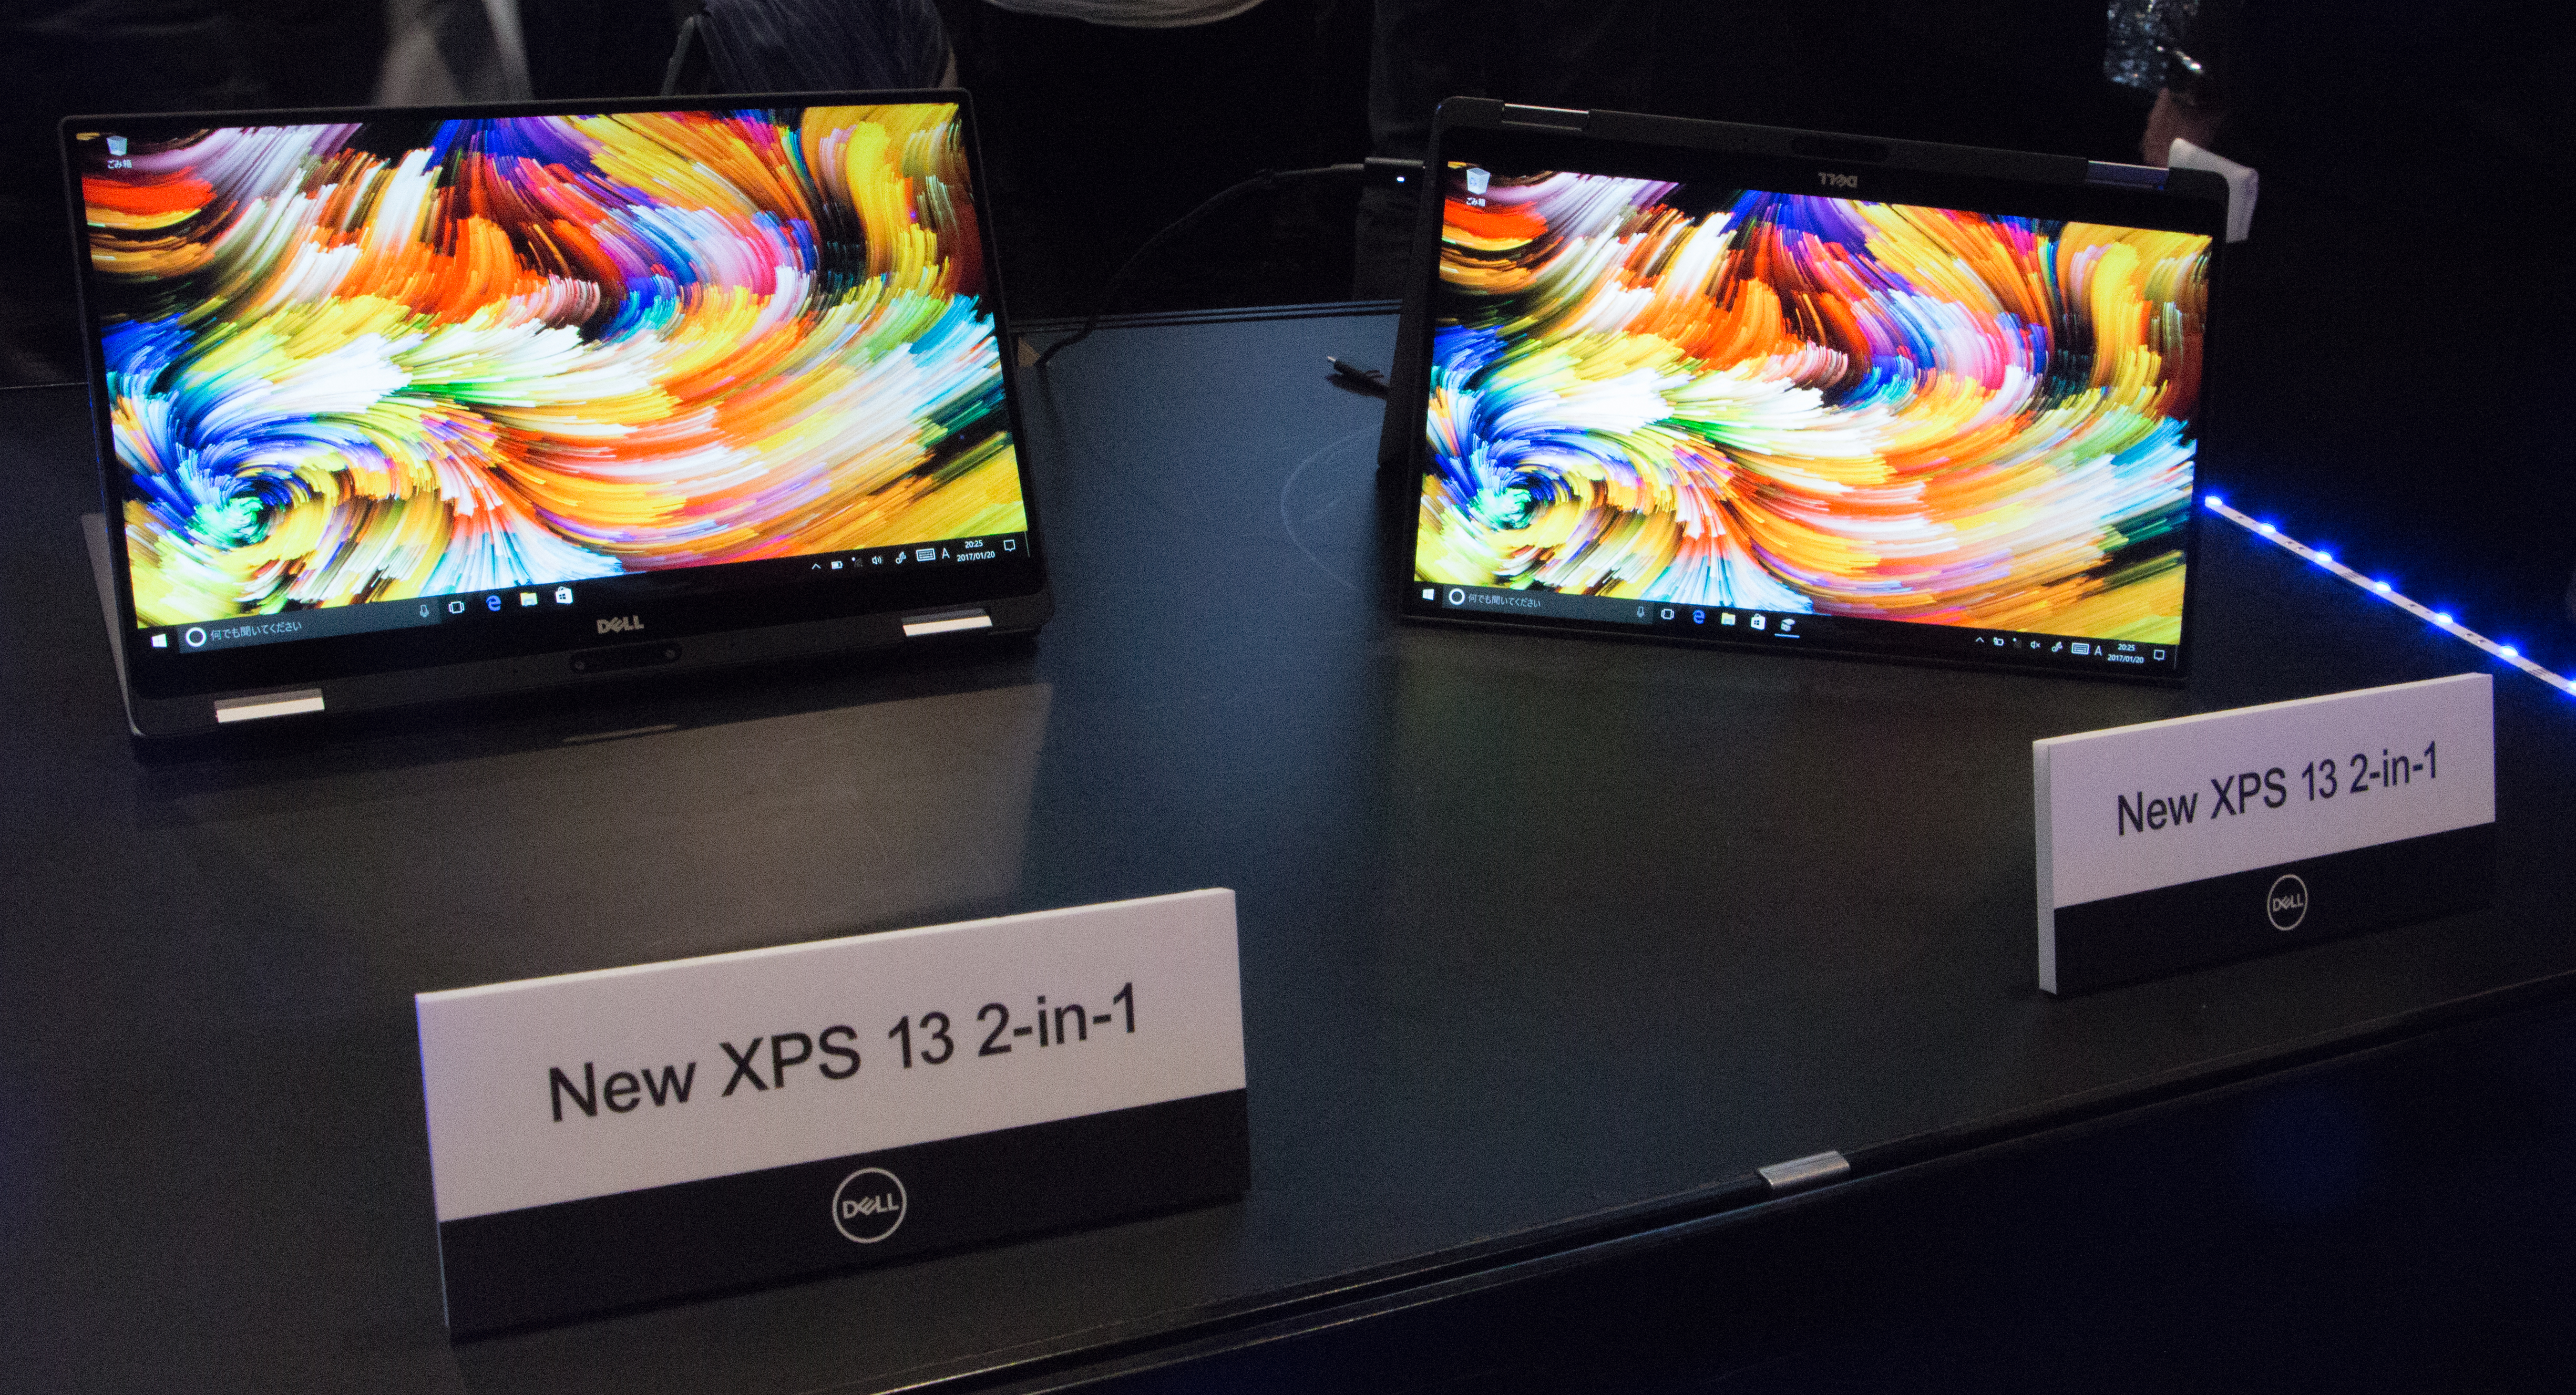 XPS 13 2 - in - 1